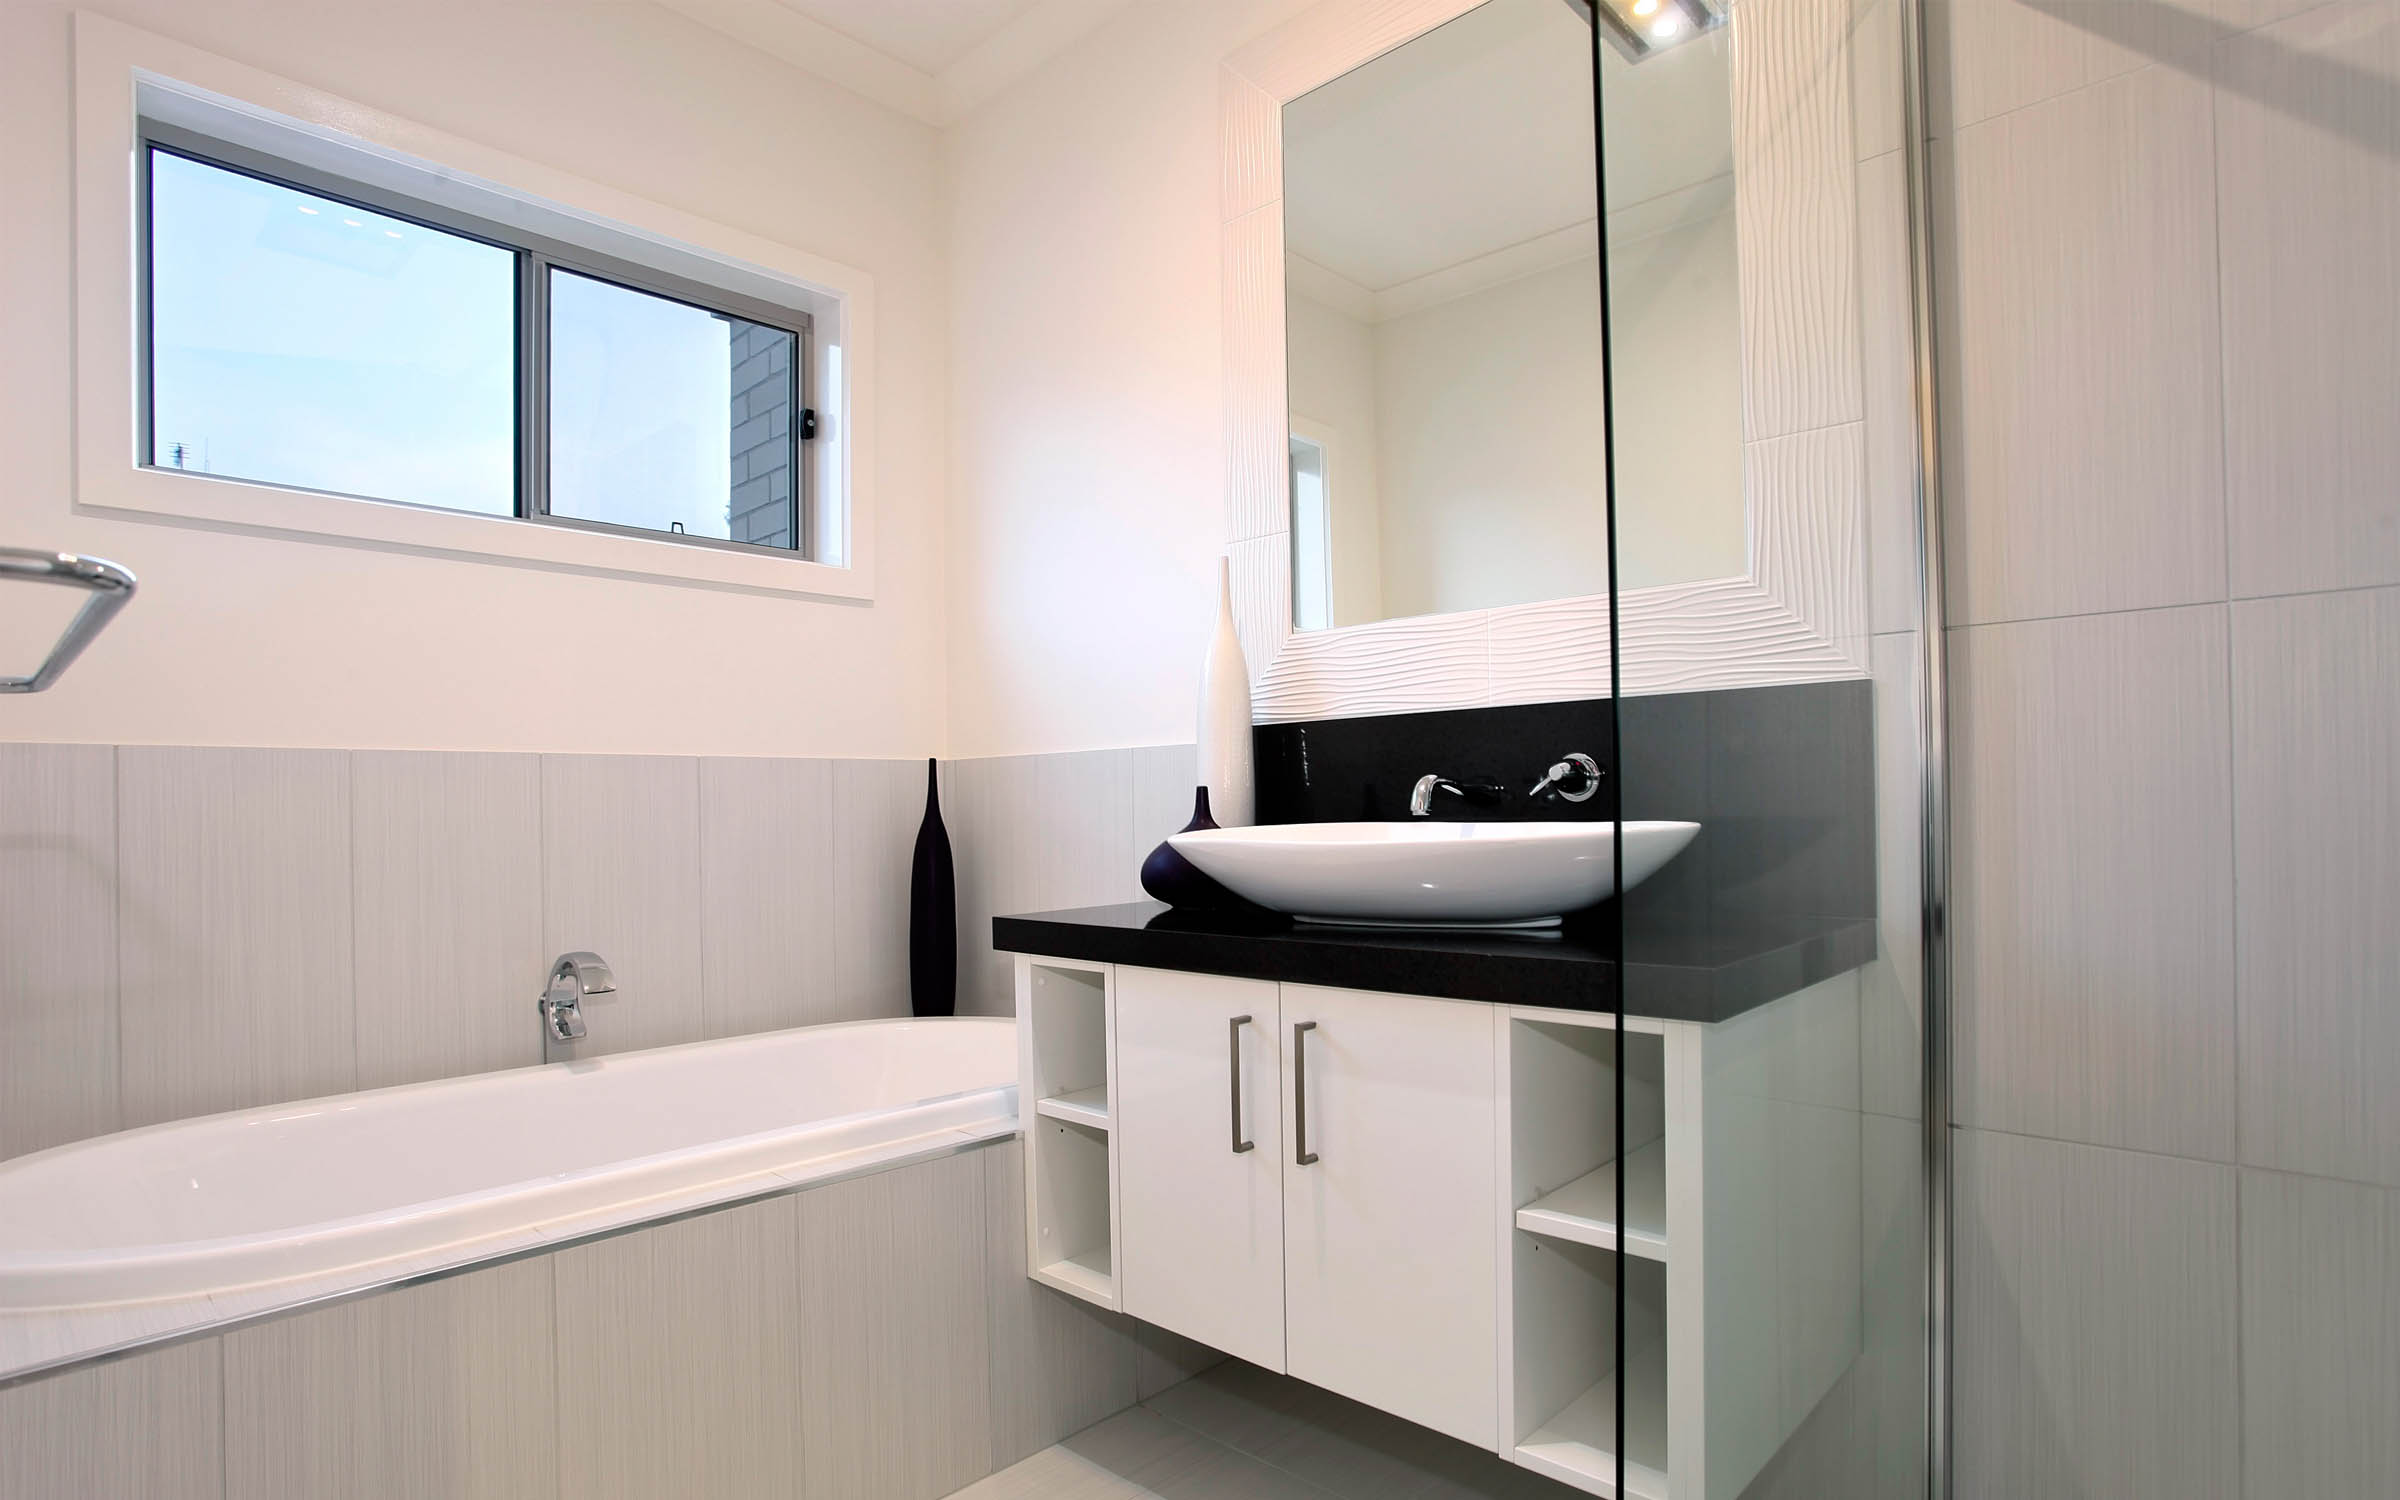 Class 1 to 10 residential bathroom with bathtub and kitchen vanity.